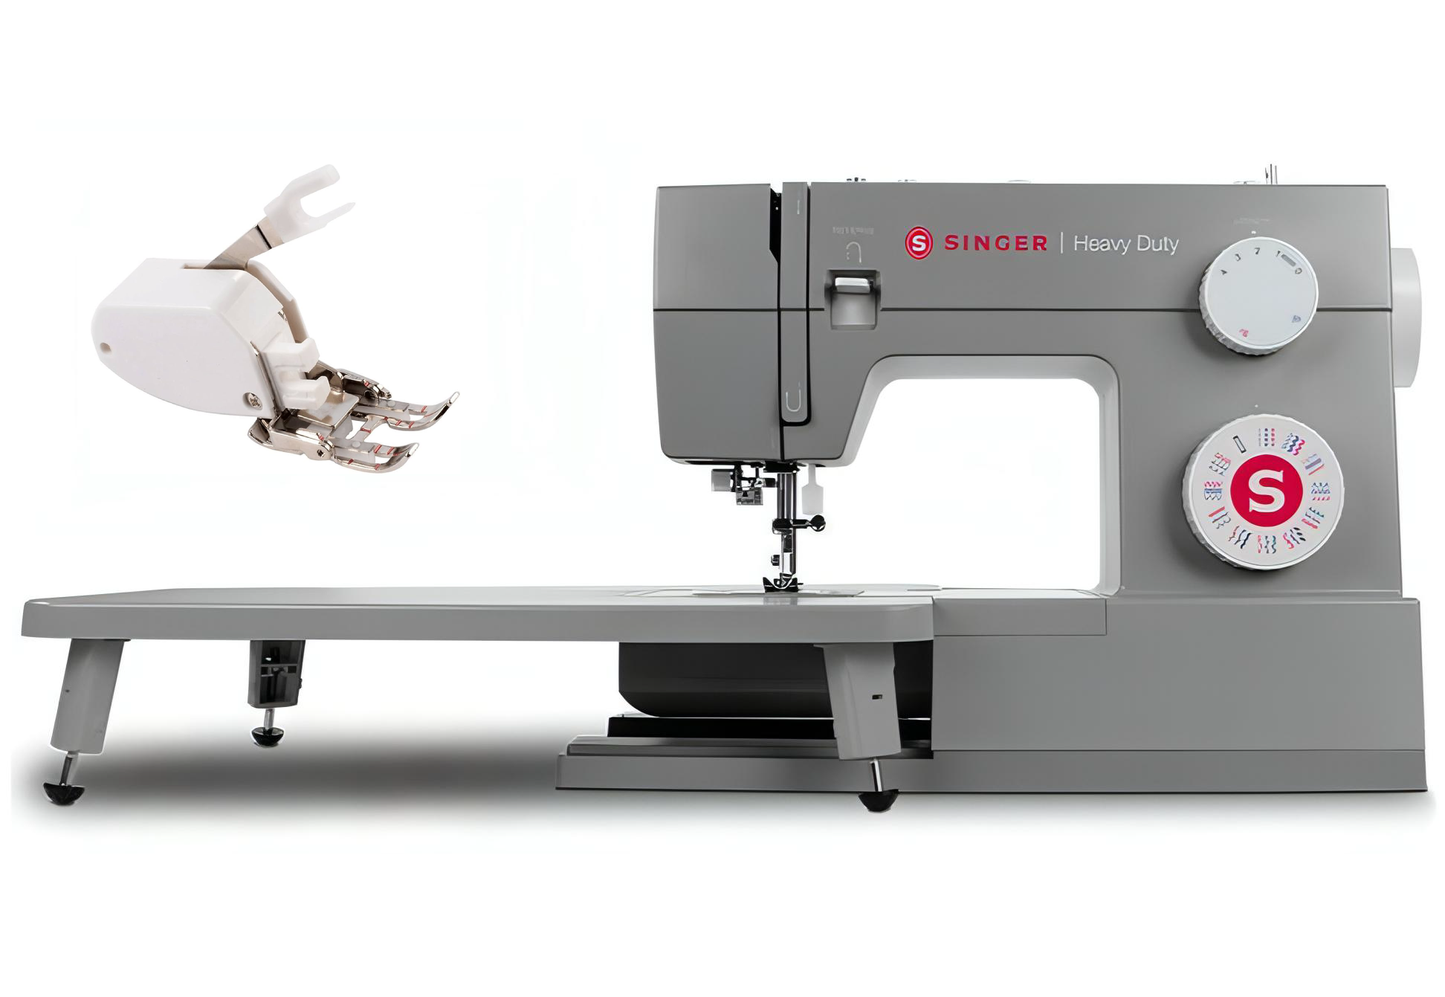 Singer Heavy Duty 4423 Sewing Machine * FREE Upgrade Offer - exclusive to Singer Outlet * - latest 2024 model with dual pulley system for maximum penetration power